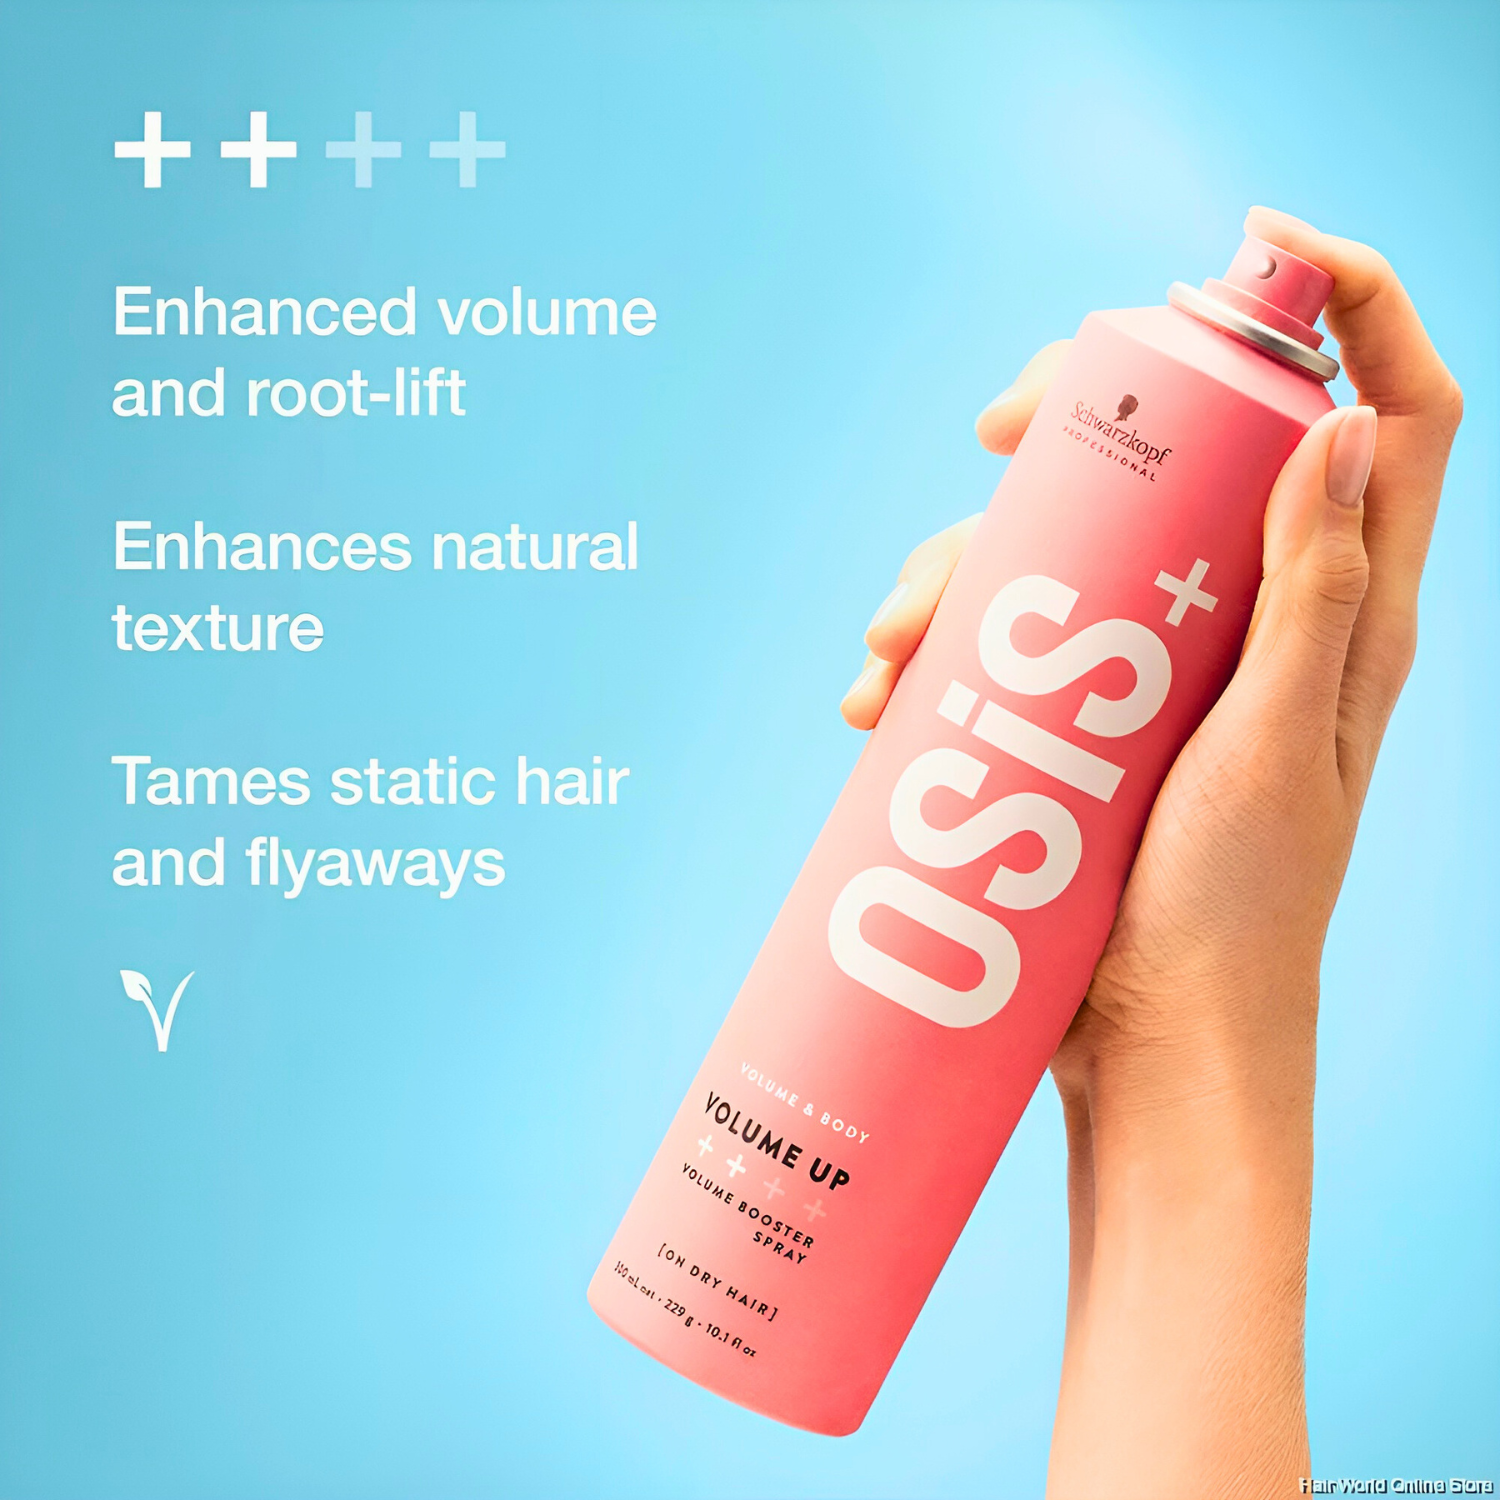 OSIS Volume Up Booster Spray